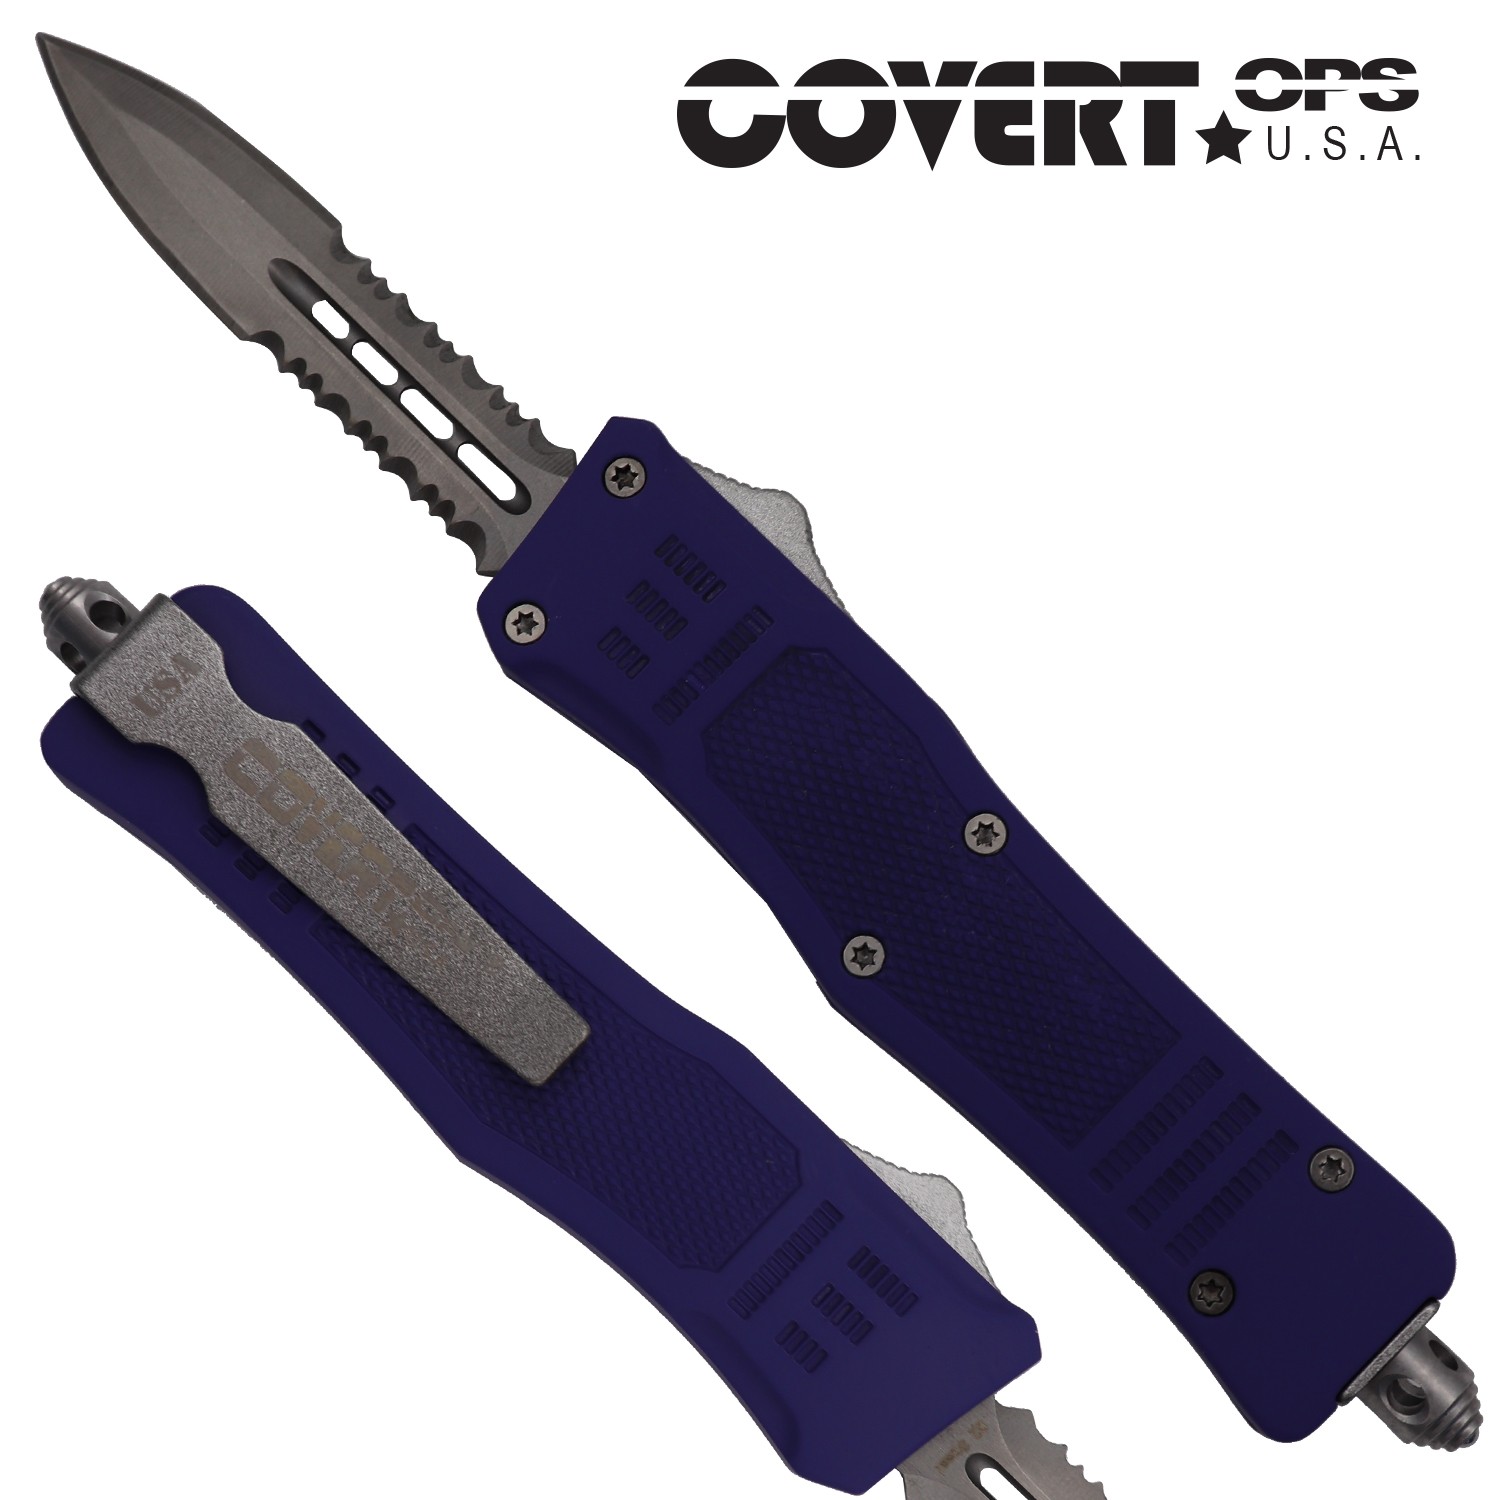 Covert OPS USA OTF Automatic Knife 7 inch overall Purple Handle Silver Double Edge D2 Steel Blade